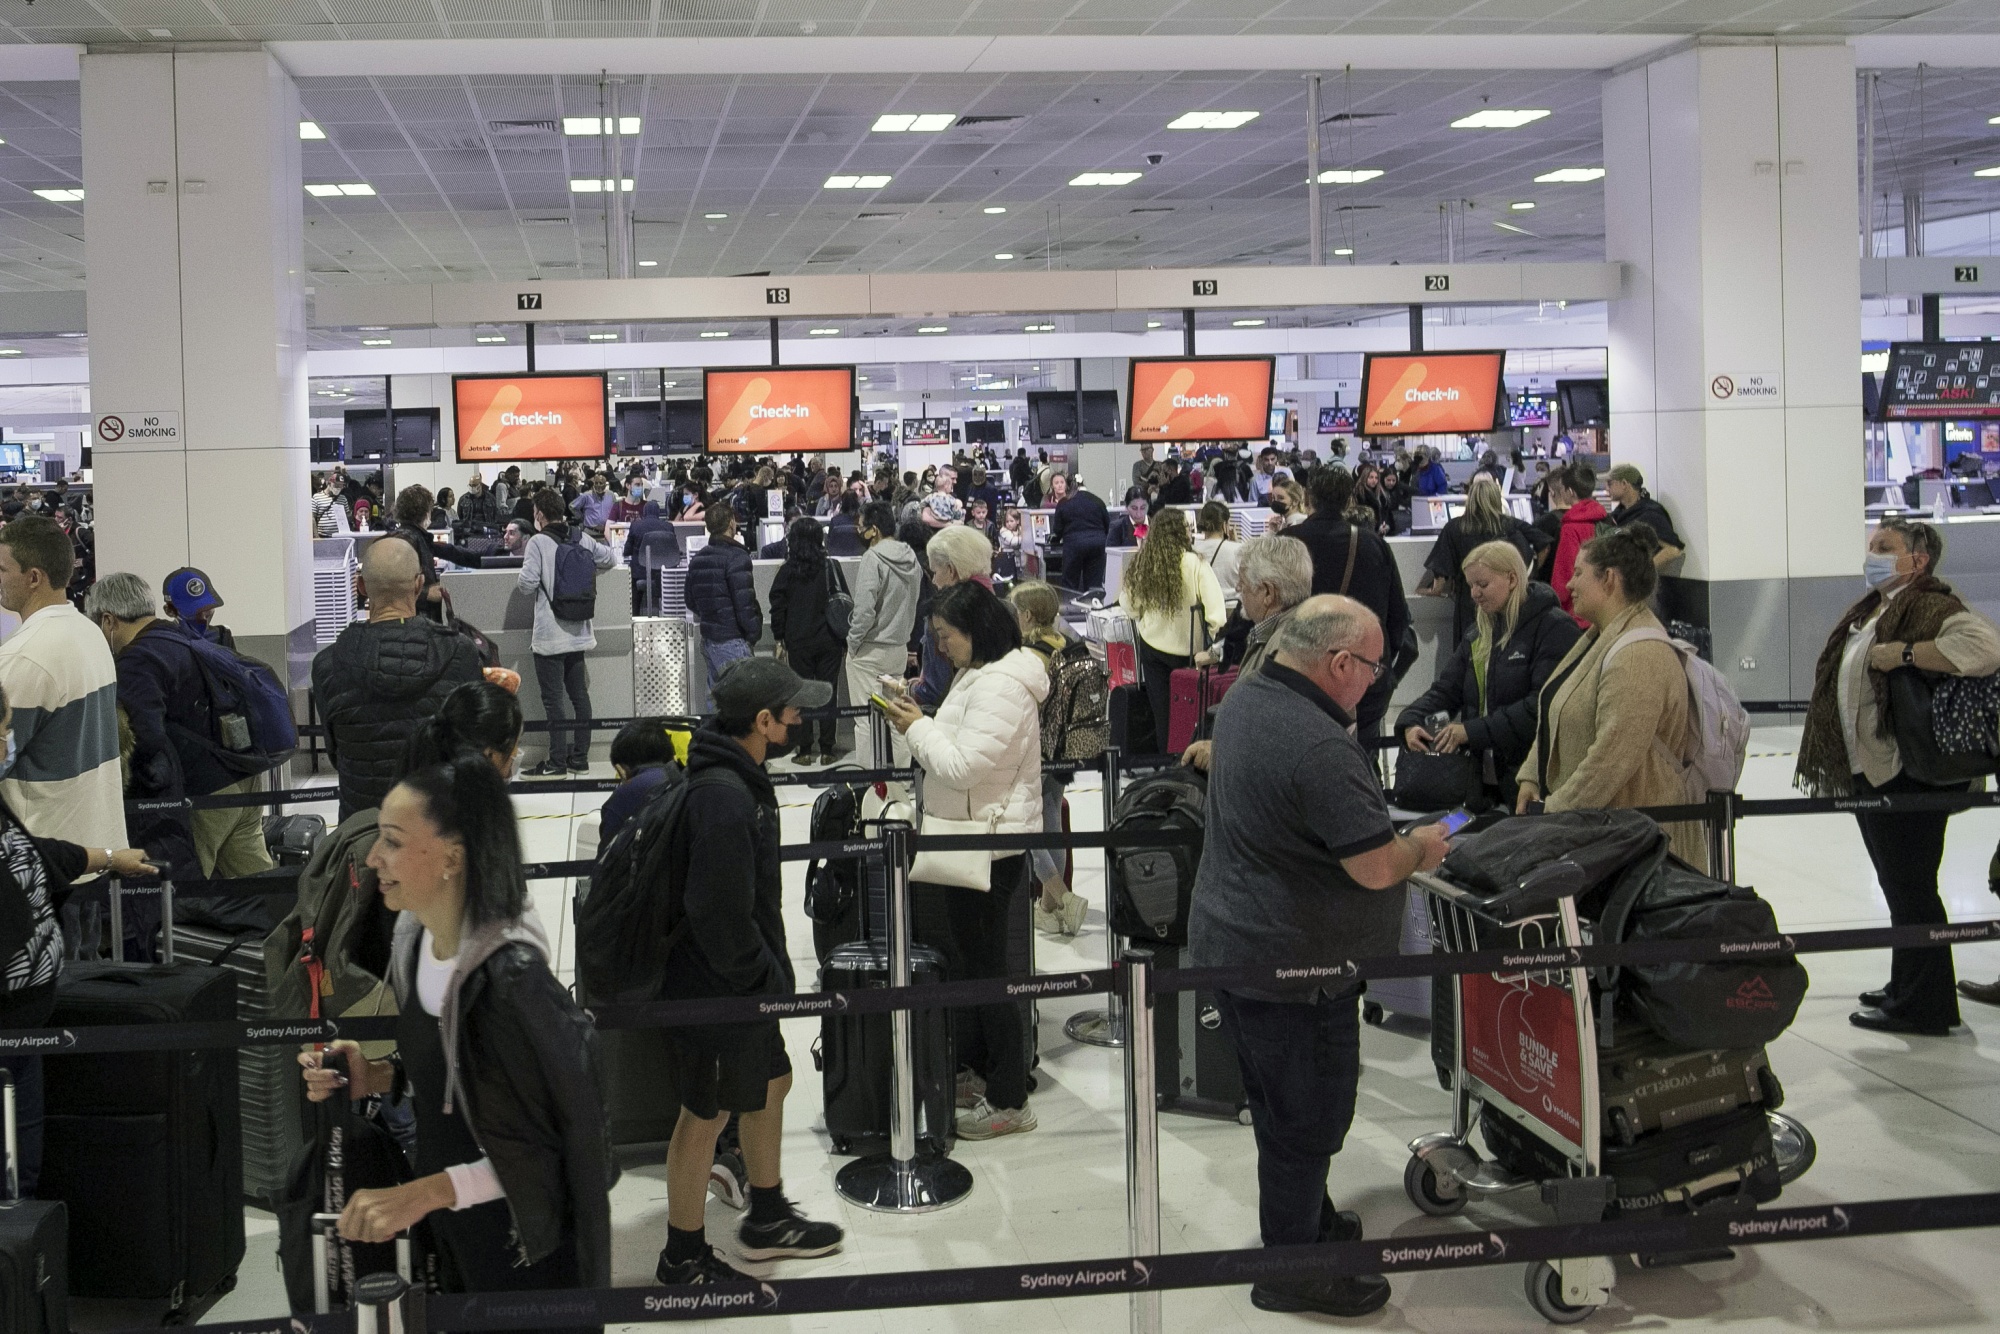 Qantas Check-in Counters At Sydney Airport